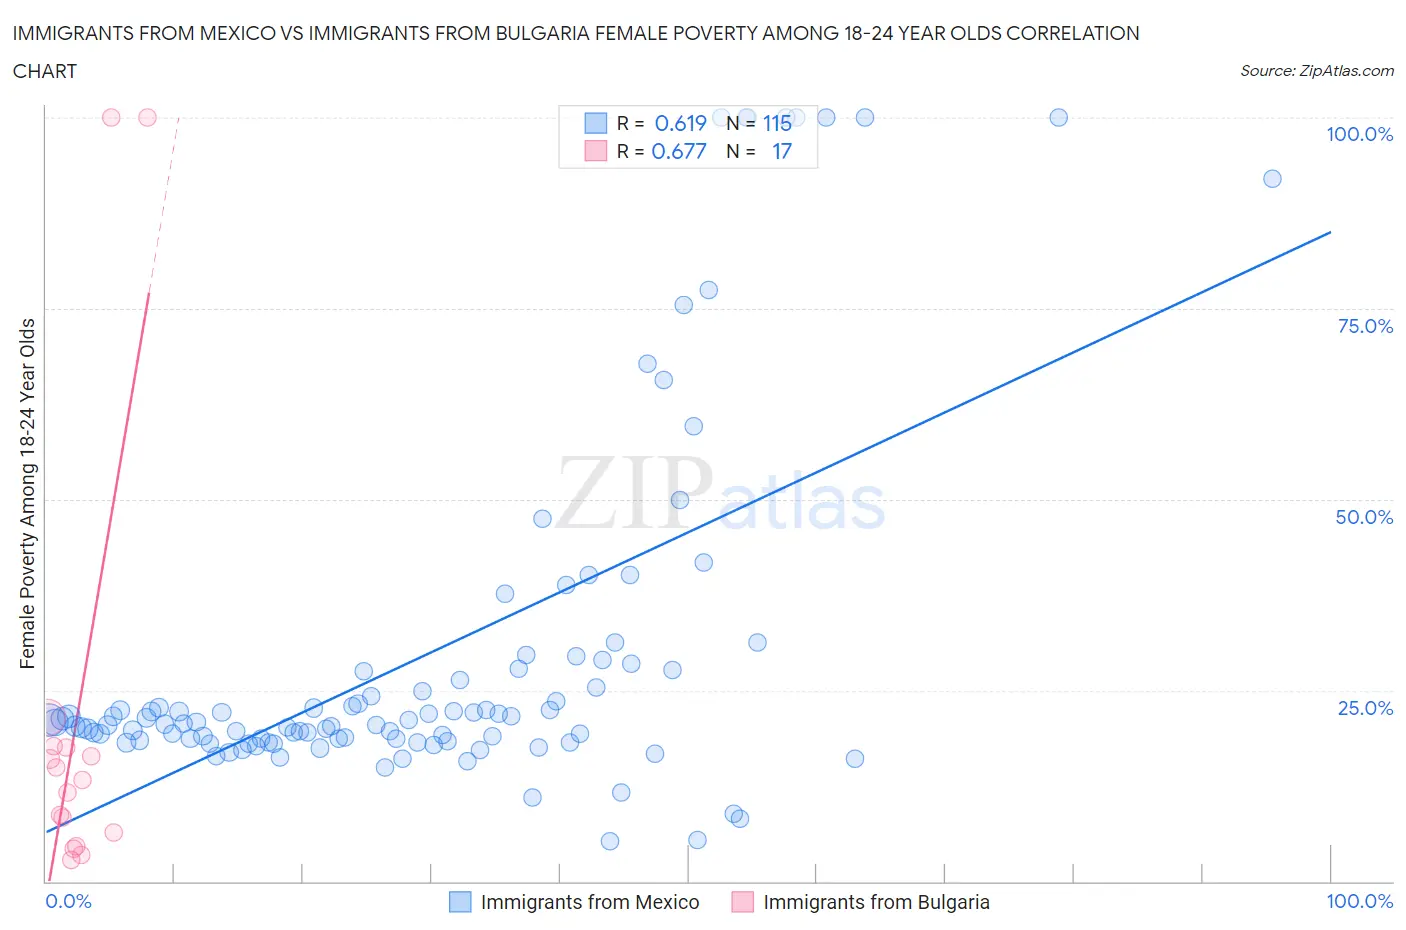 Immigrants from Mexico vs Immigrants from Bulgaria Female Poverty Among 18-24 Year Olds